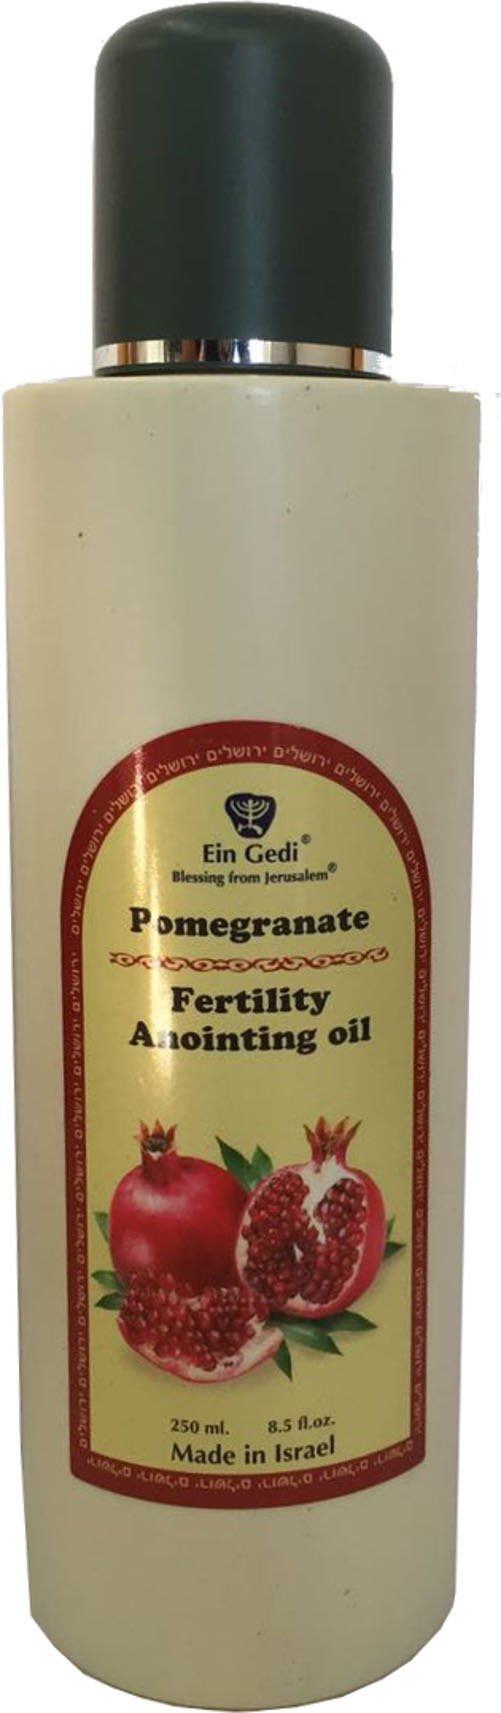 Pomegranate fertility anointing Oil from Ein Gedi large size - Anointing oil - 250 ml ( 8.5 fl. oz. )